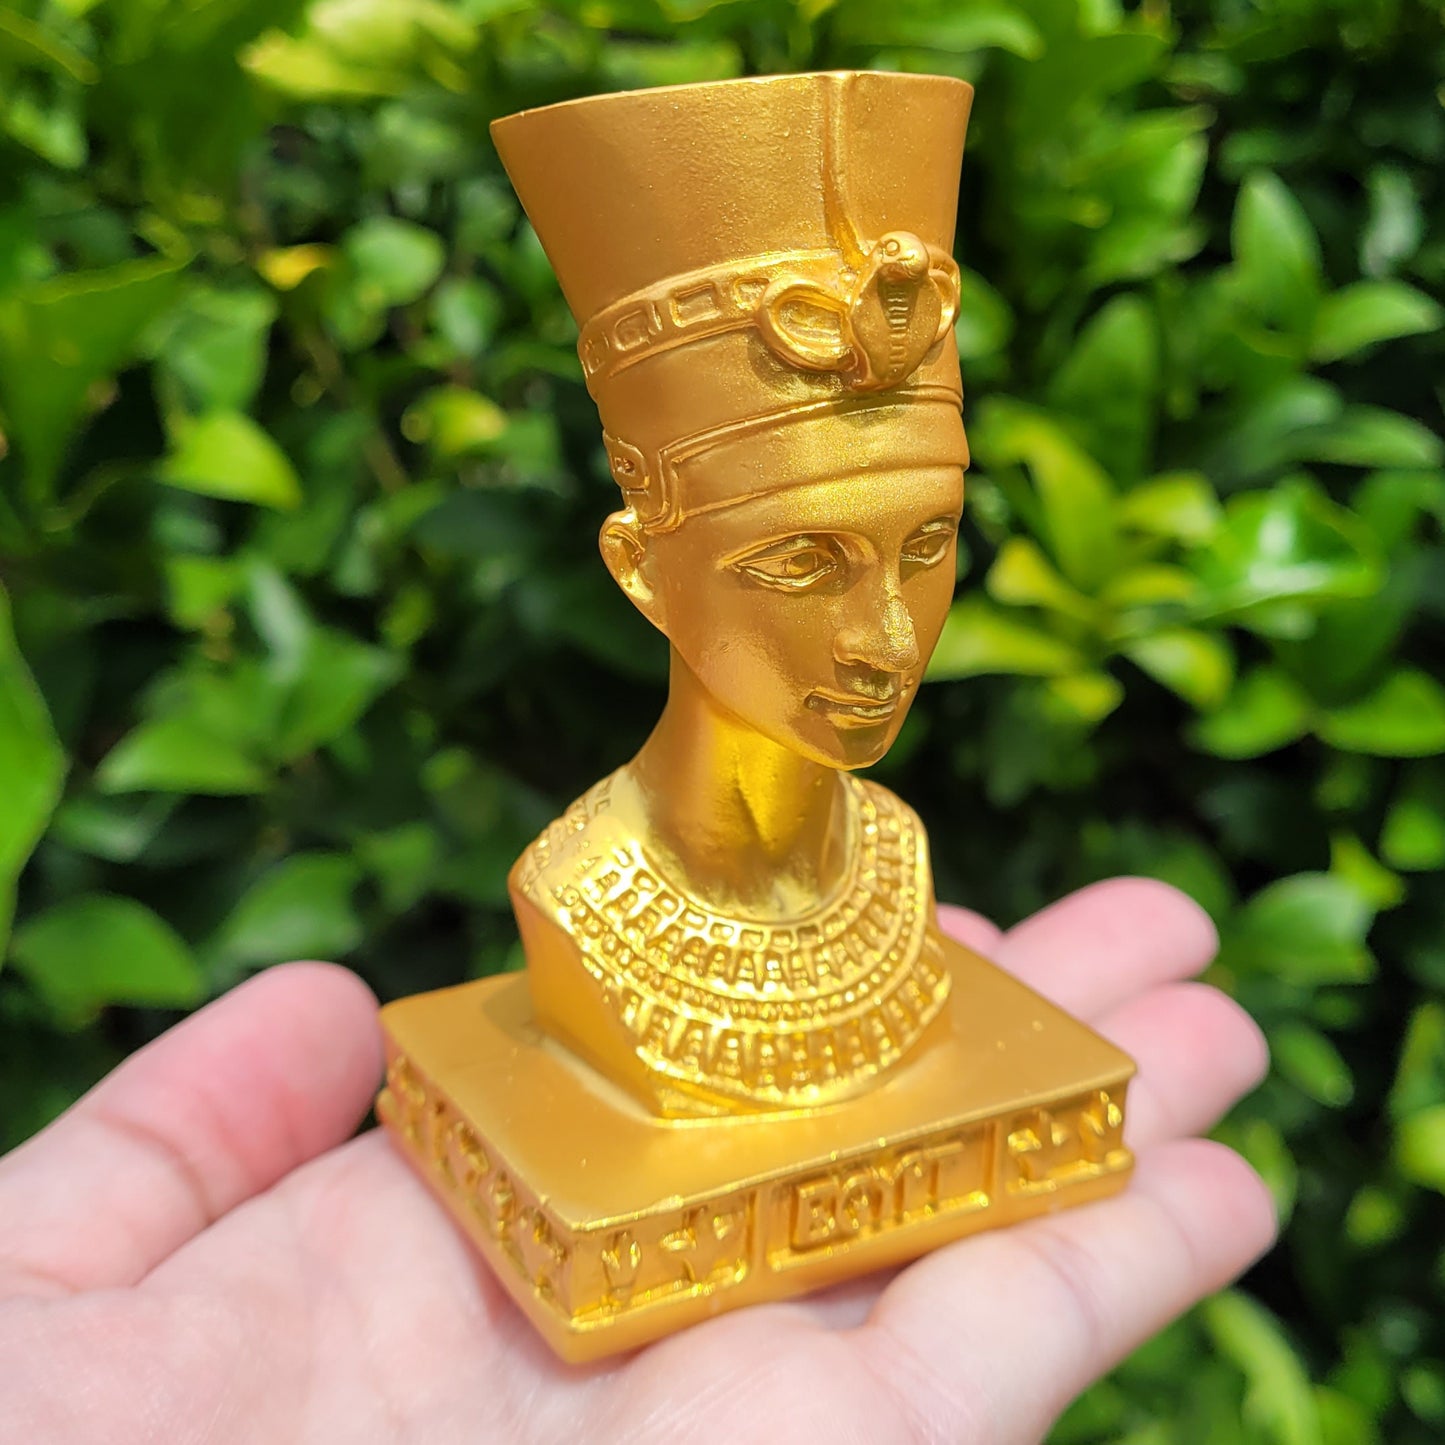 Egyptian Pharaoh Sphere Display Stand in Gold or Silver, for Crystal Balls or Eggs 1.5" to 3" (37mm to 75mm)